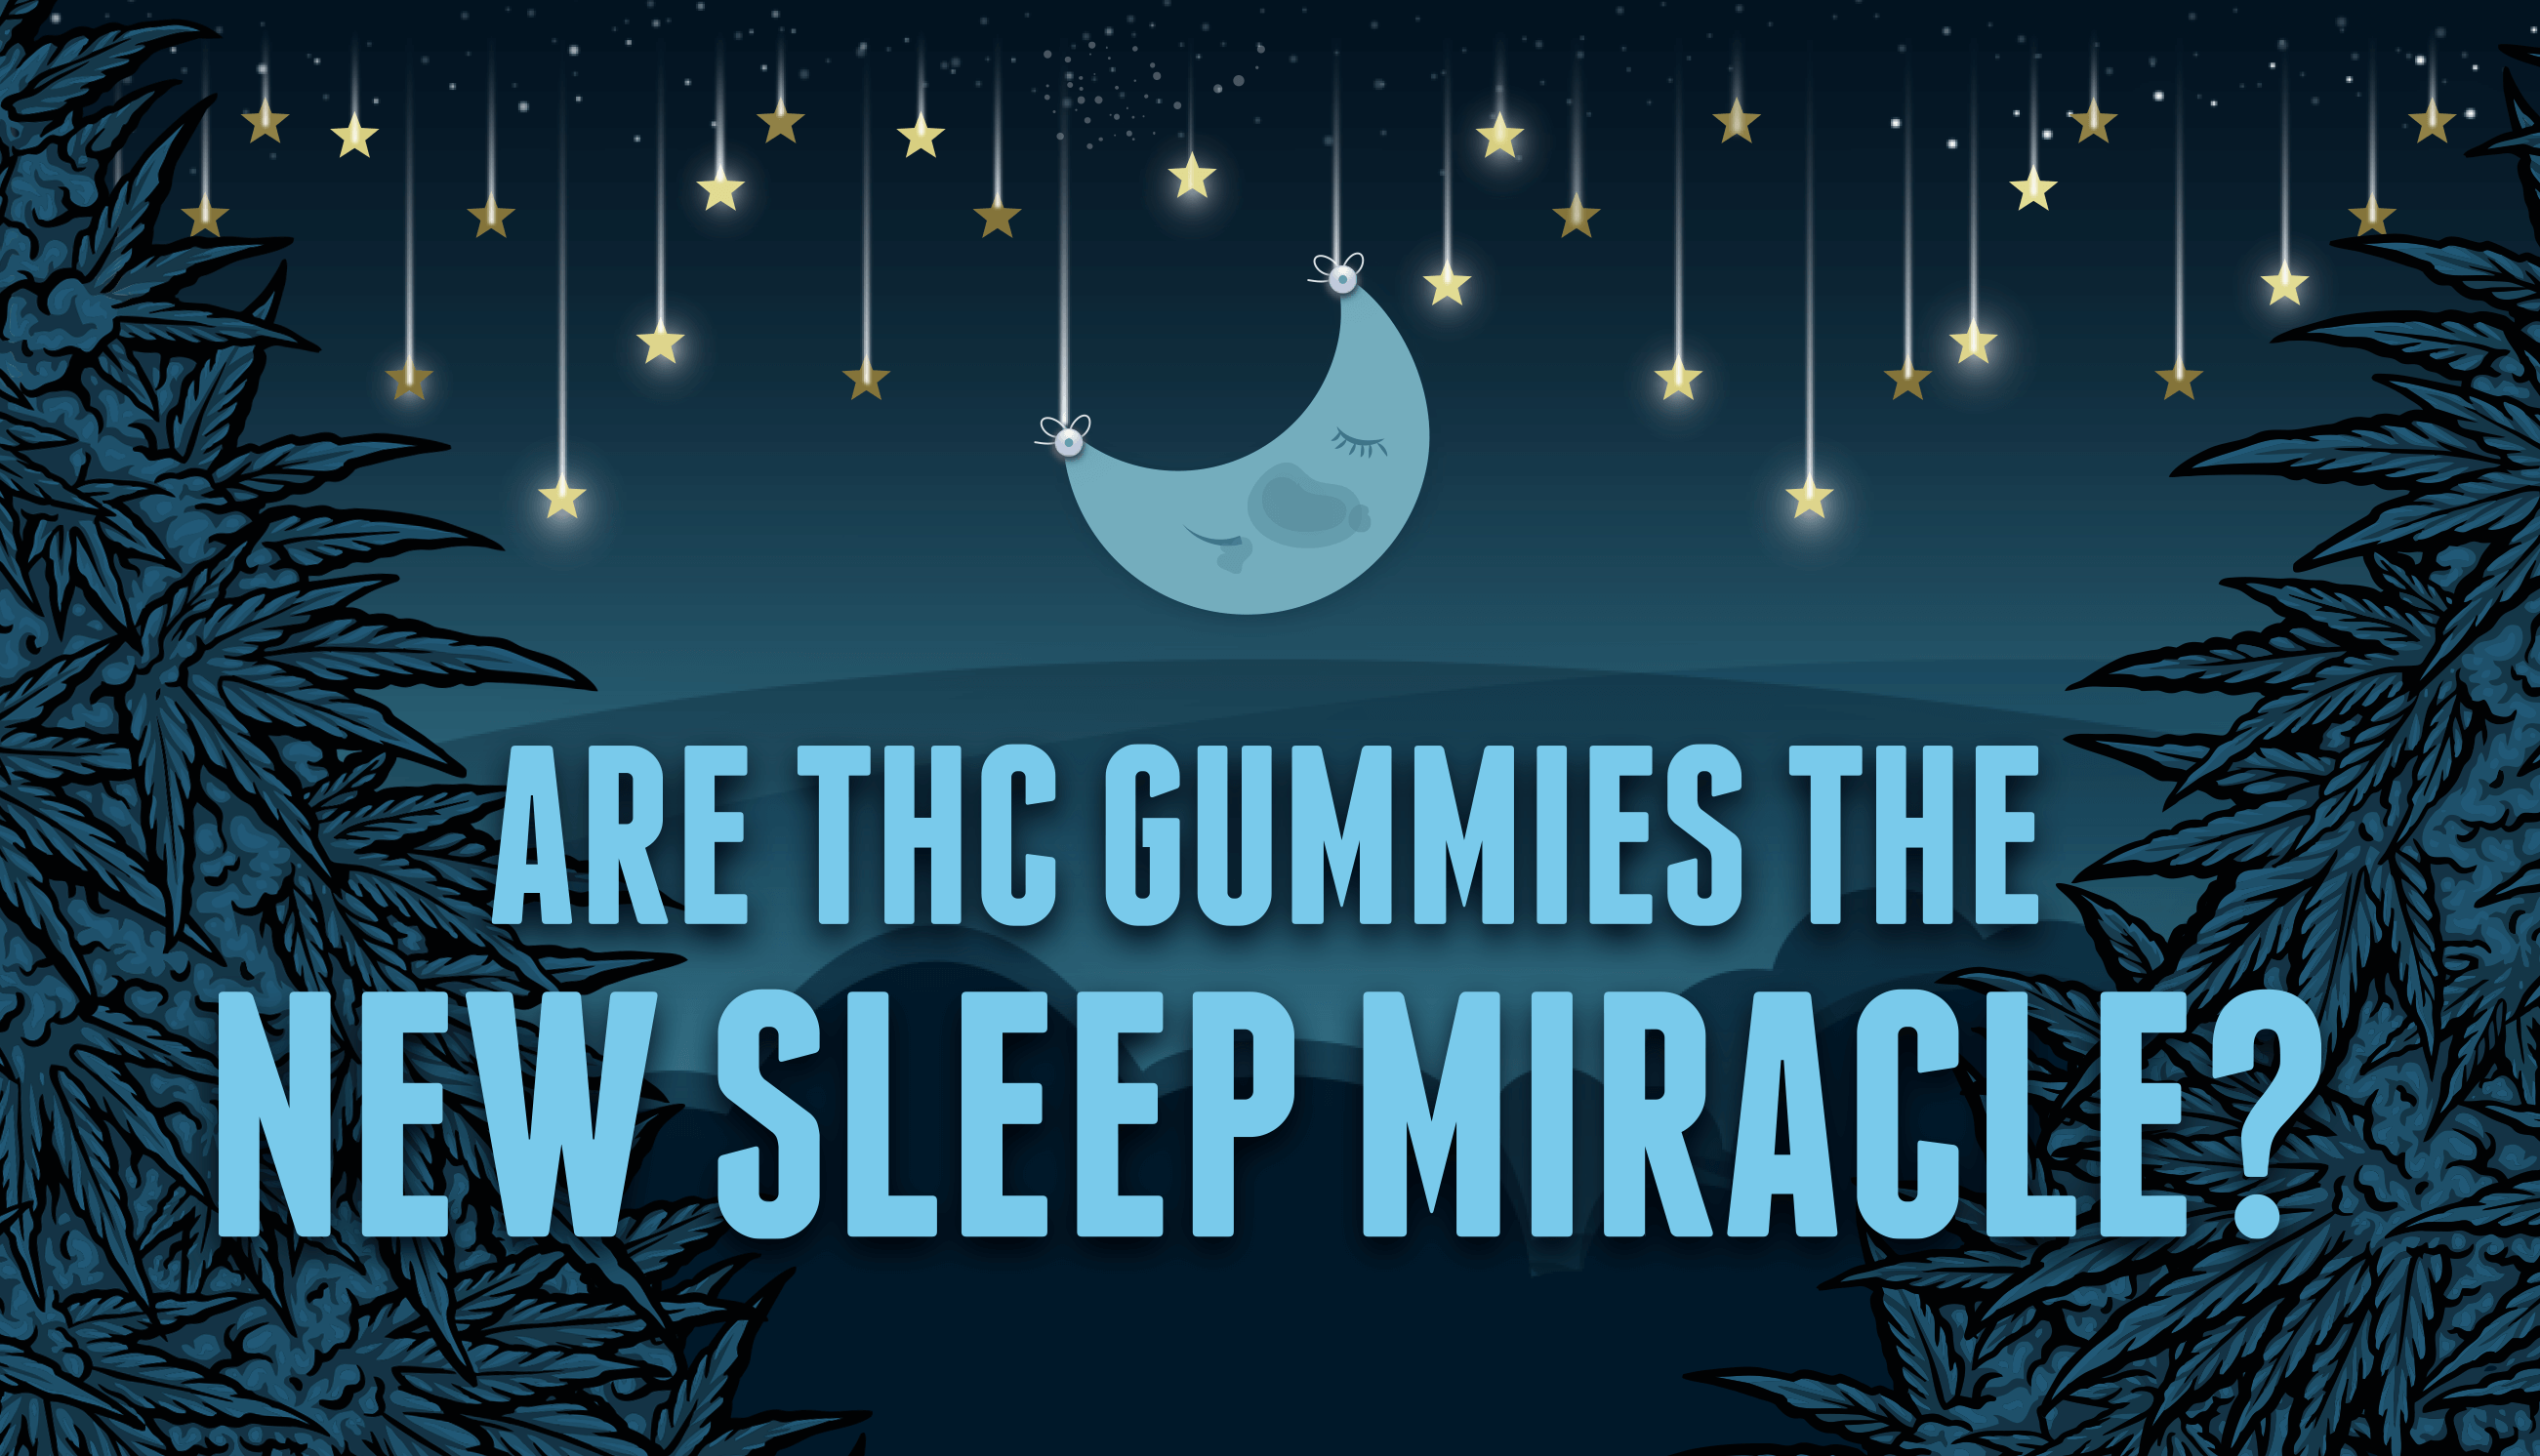 Understanding Dosage: Is THC Your Sleep Miracle?